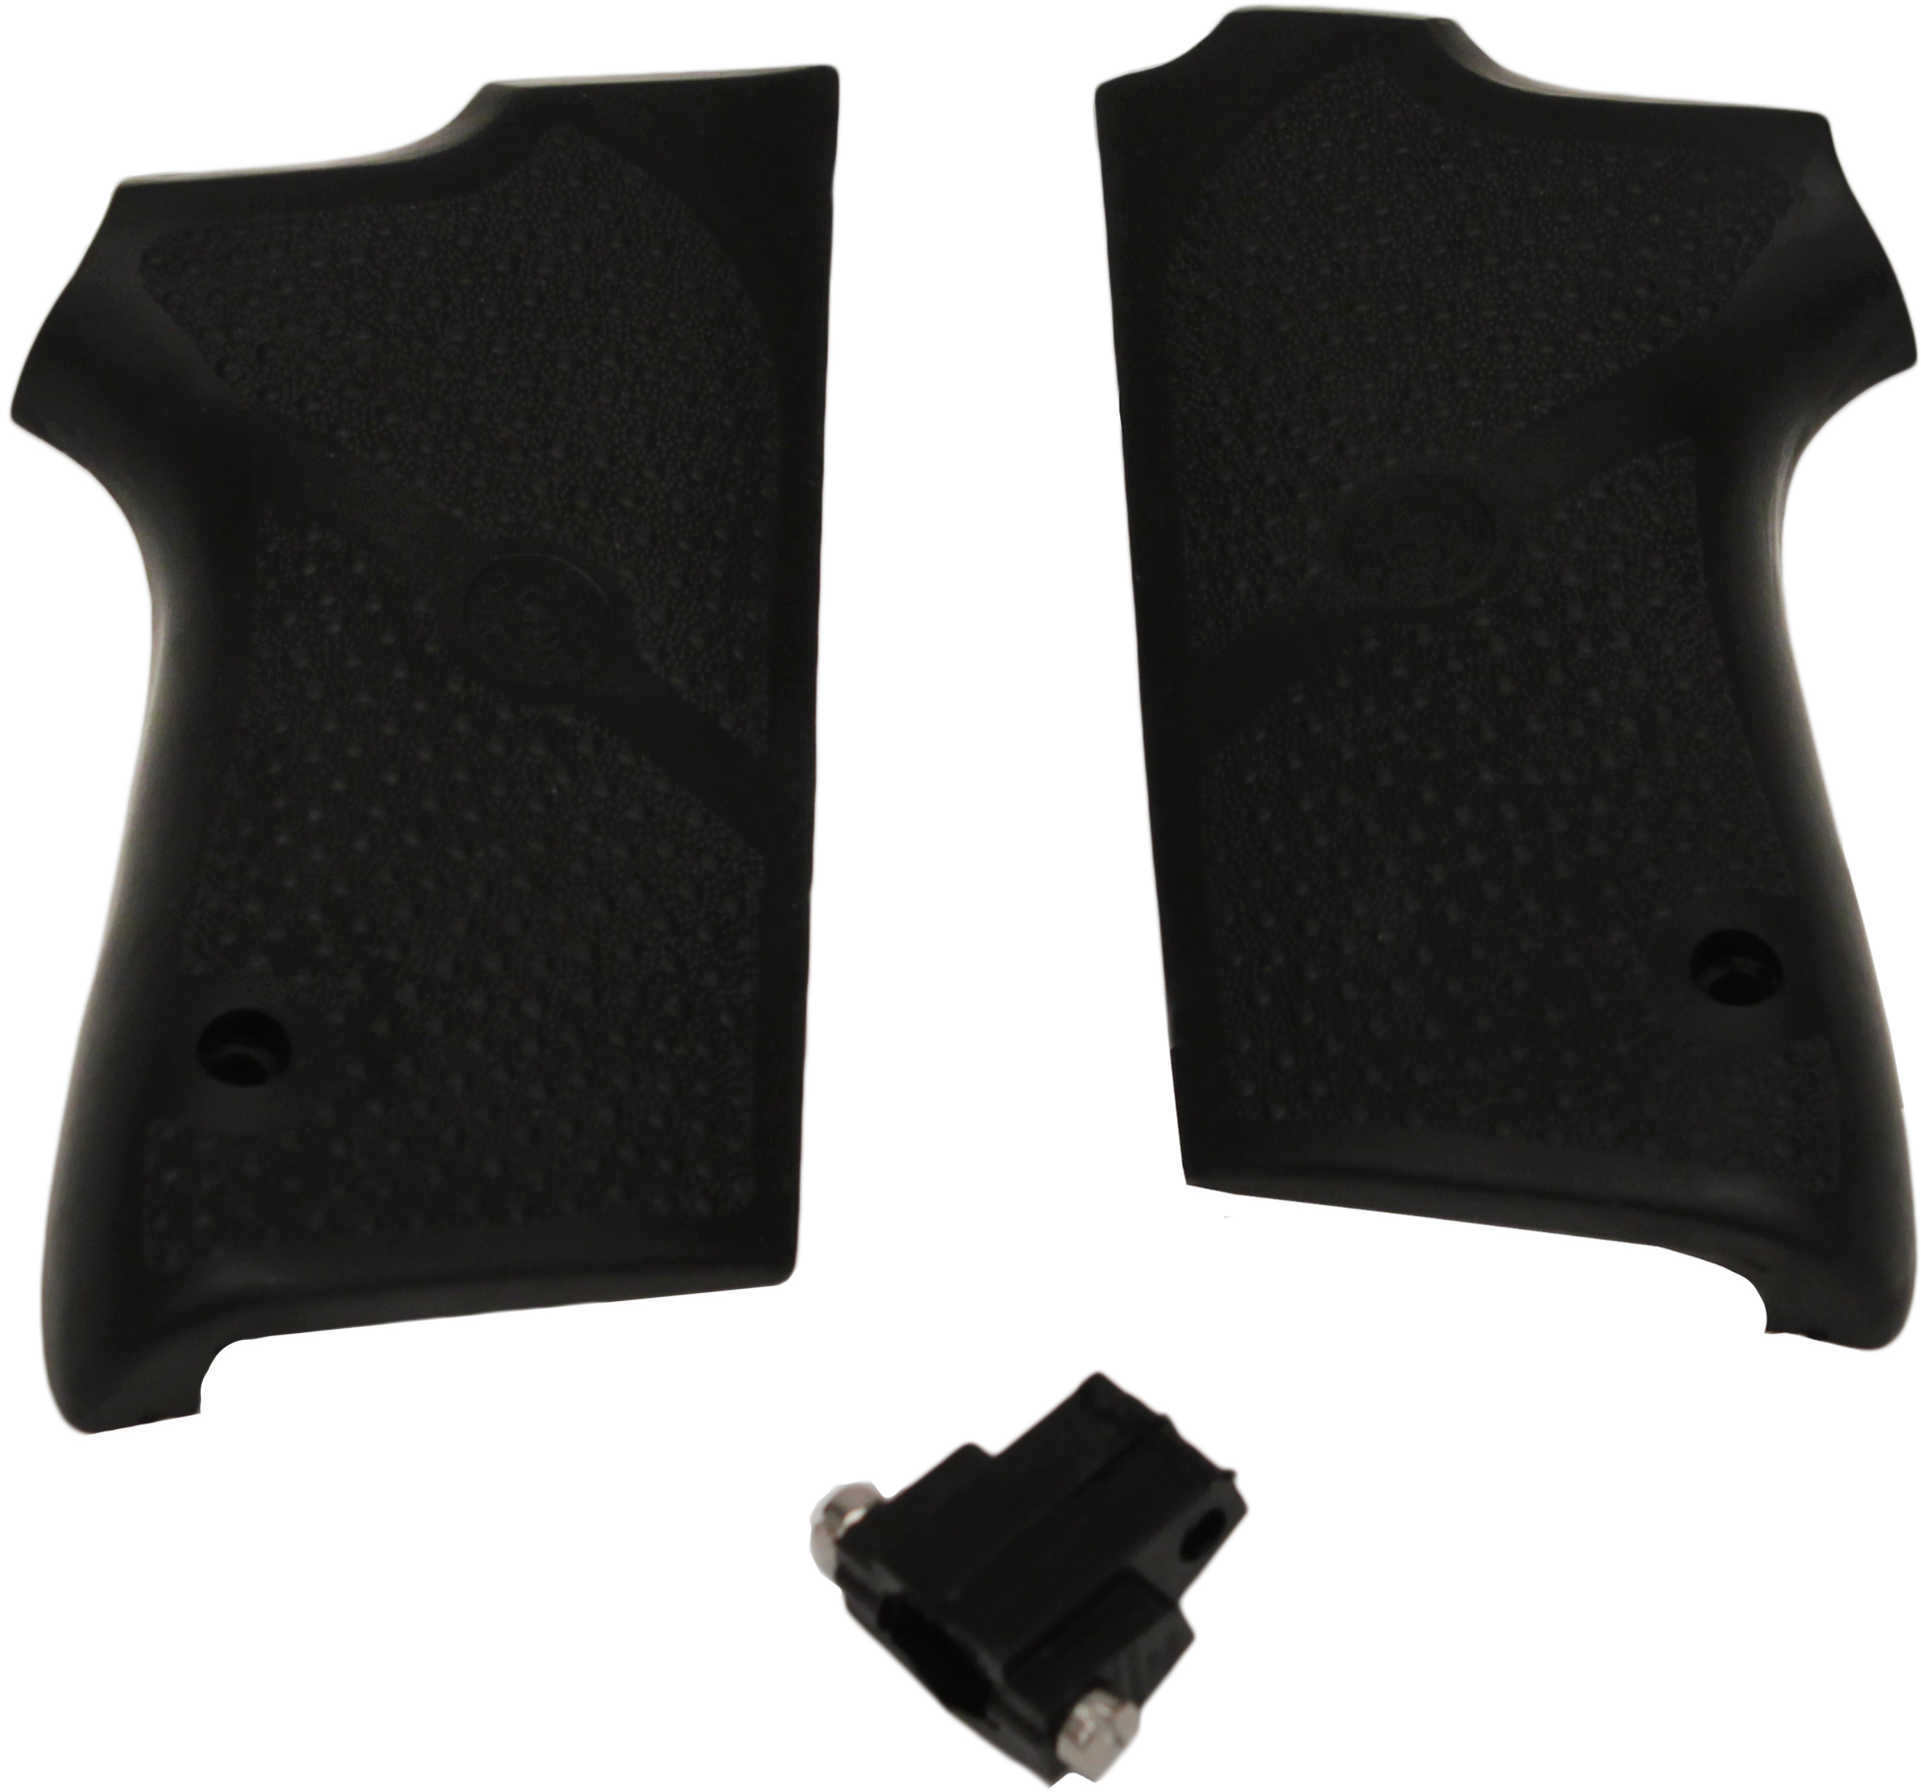 Hogue Rubber Grip for S&W Compact 9mm Single Stack Mag 13010